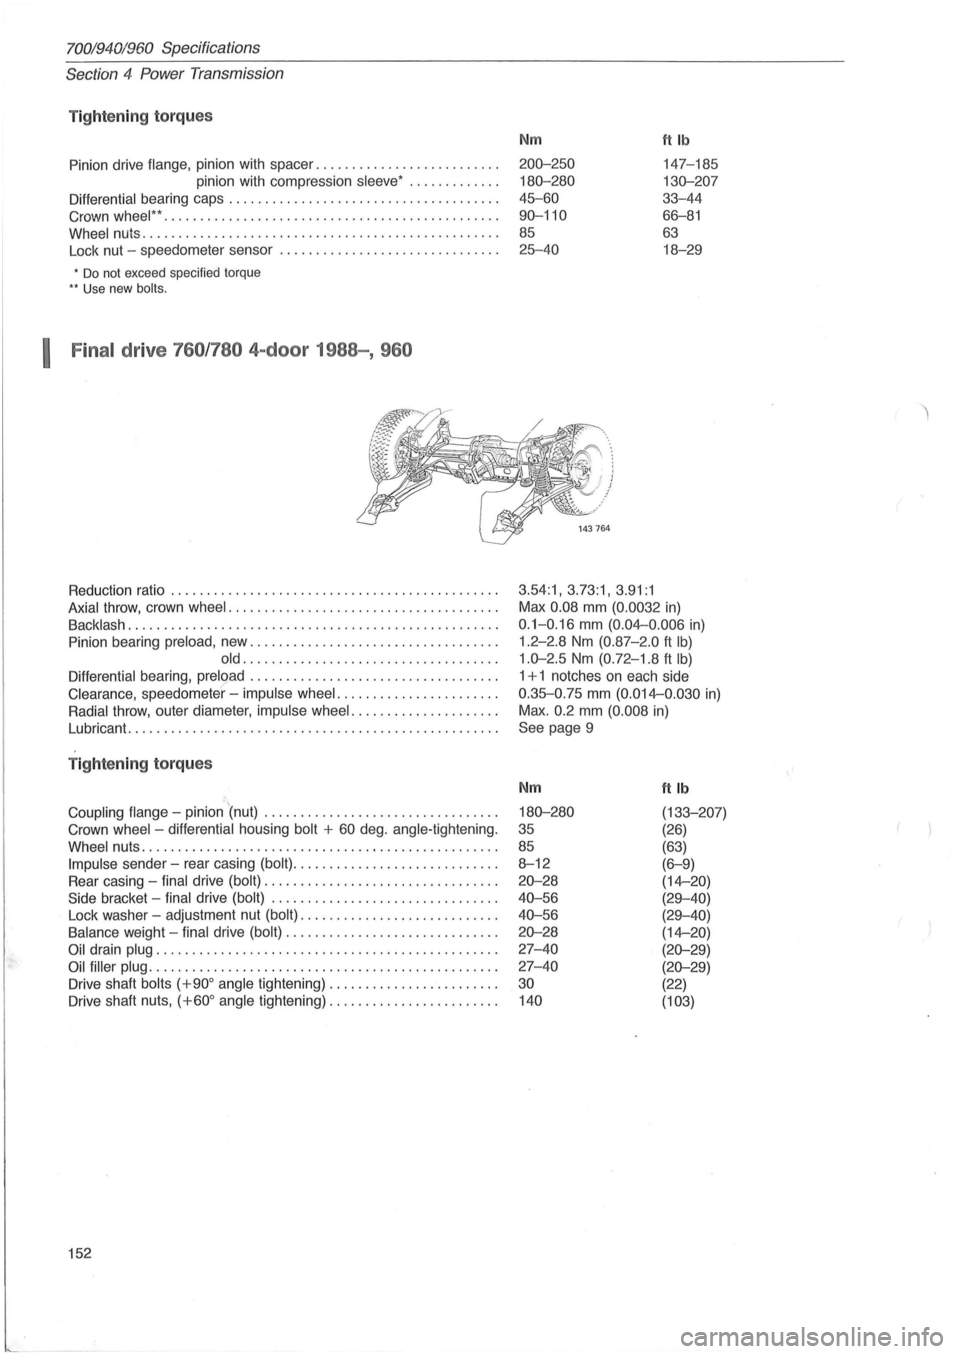 VOLVO 700 1982  Service Repair Manual 70019401960 Specifications 
Section 
4 Power  Transmission 
Tightening  torqu es 
Pinion  drive flange, pinion  with spacer .......... ........ ....... . 
pinion  with compression 
sleeve  ..........